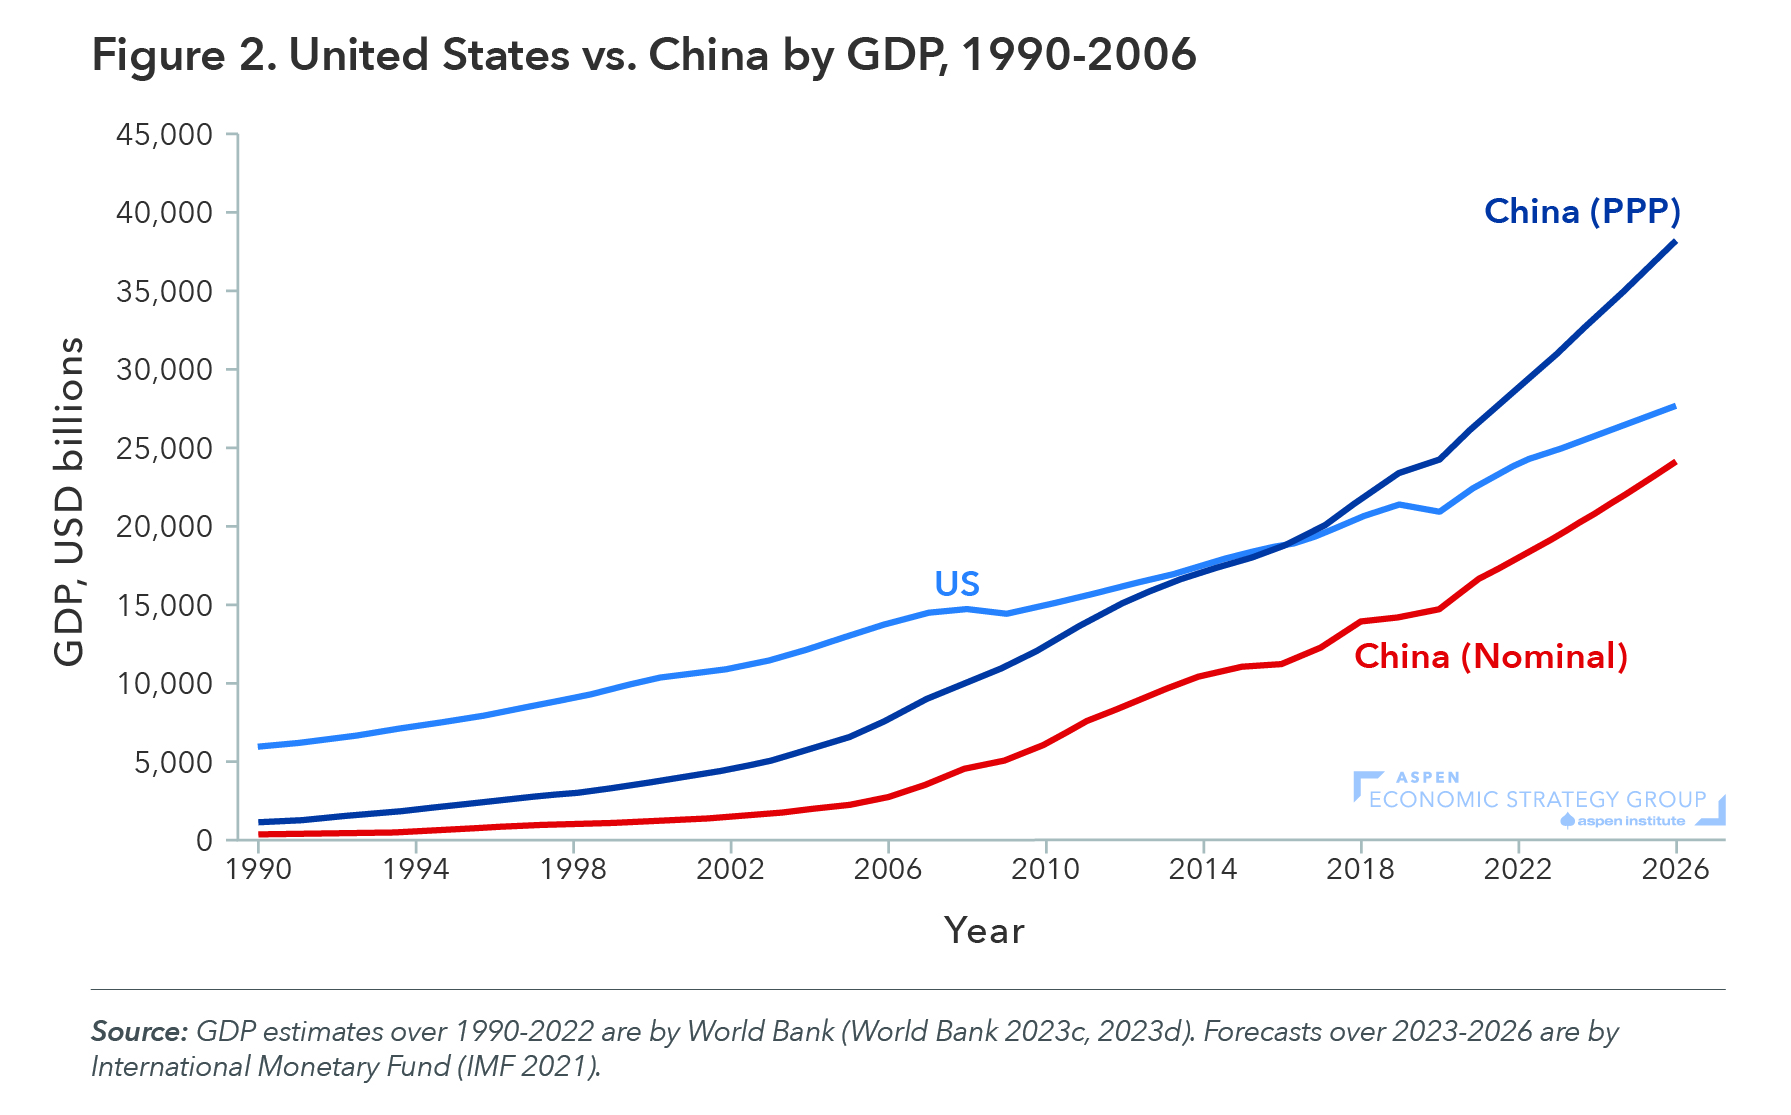 Figure 2: United States vs. China by GDP, 1990-2006